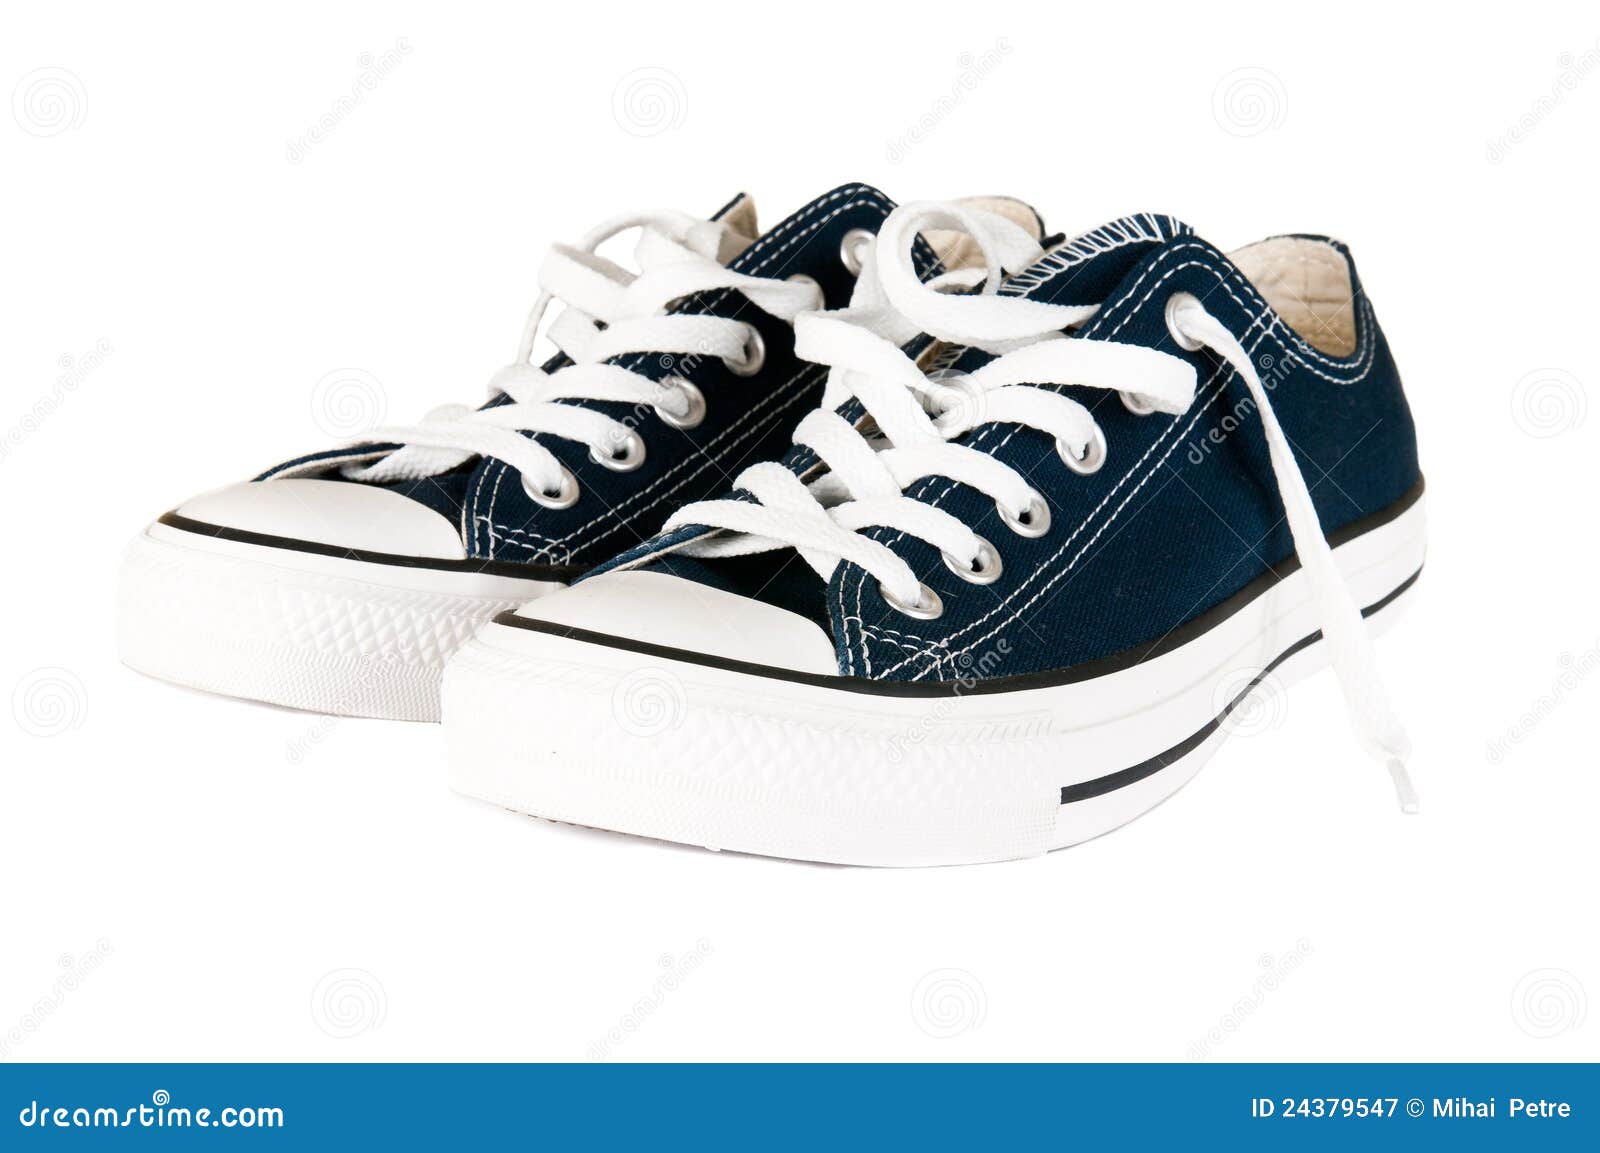 Sneakers Over White Background Stock Image - Image of abstract, white ...